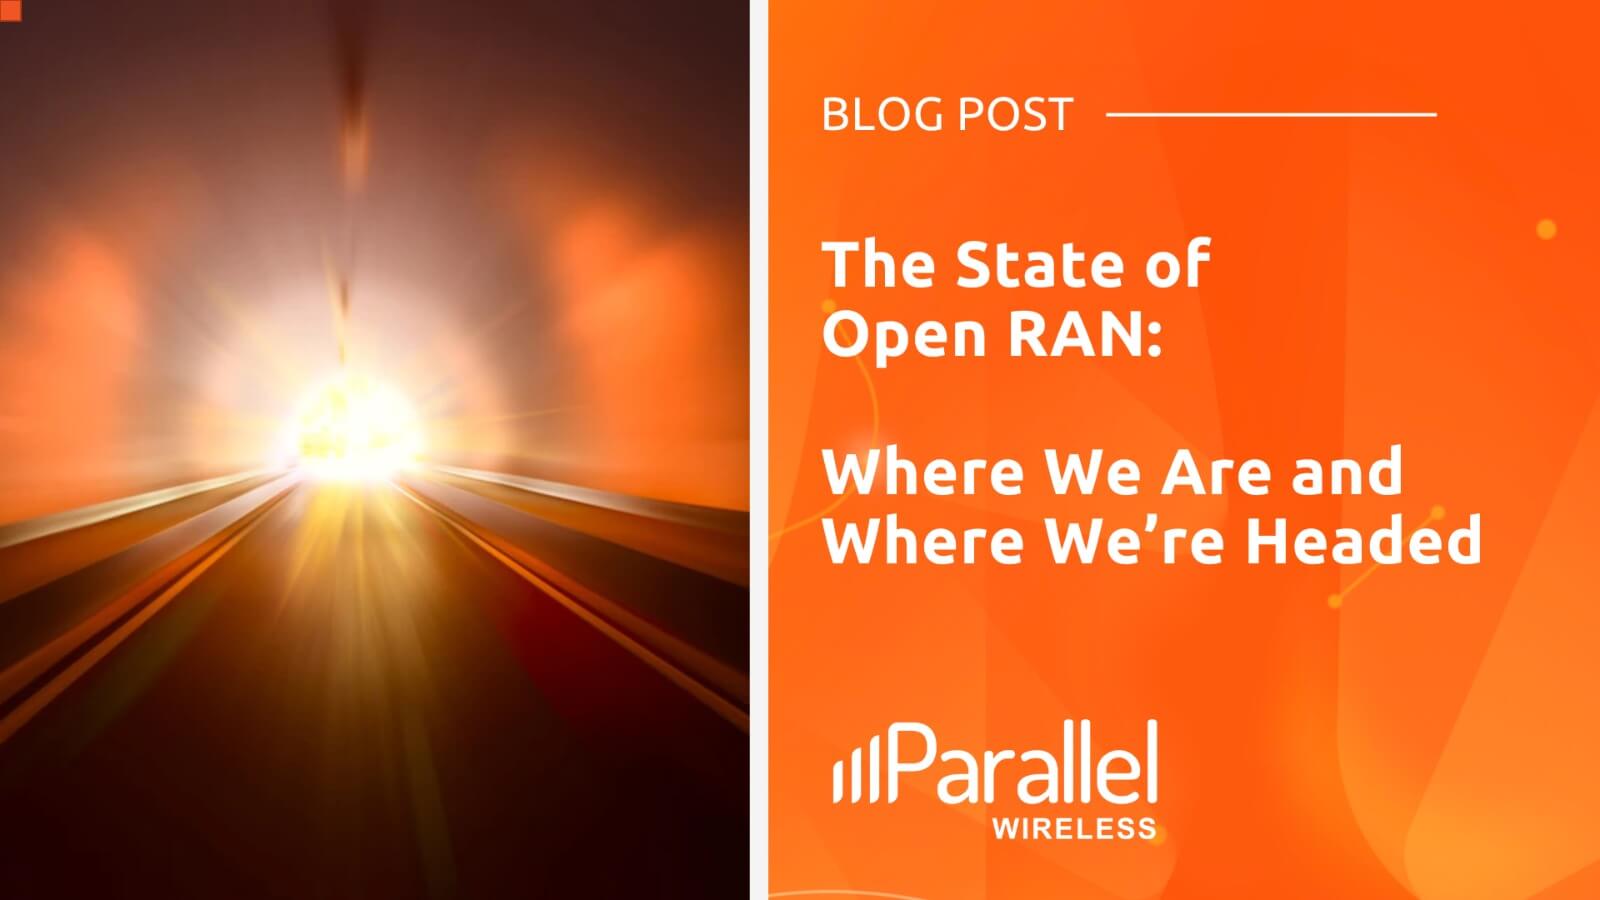 The State of Open